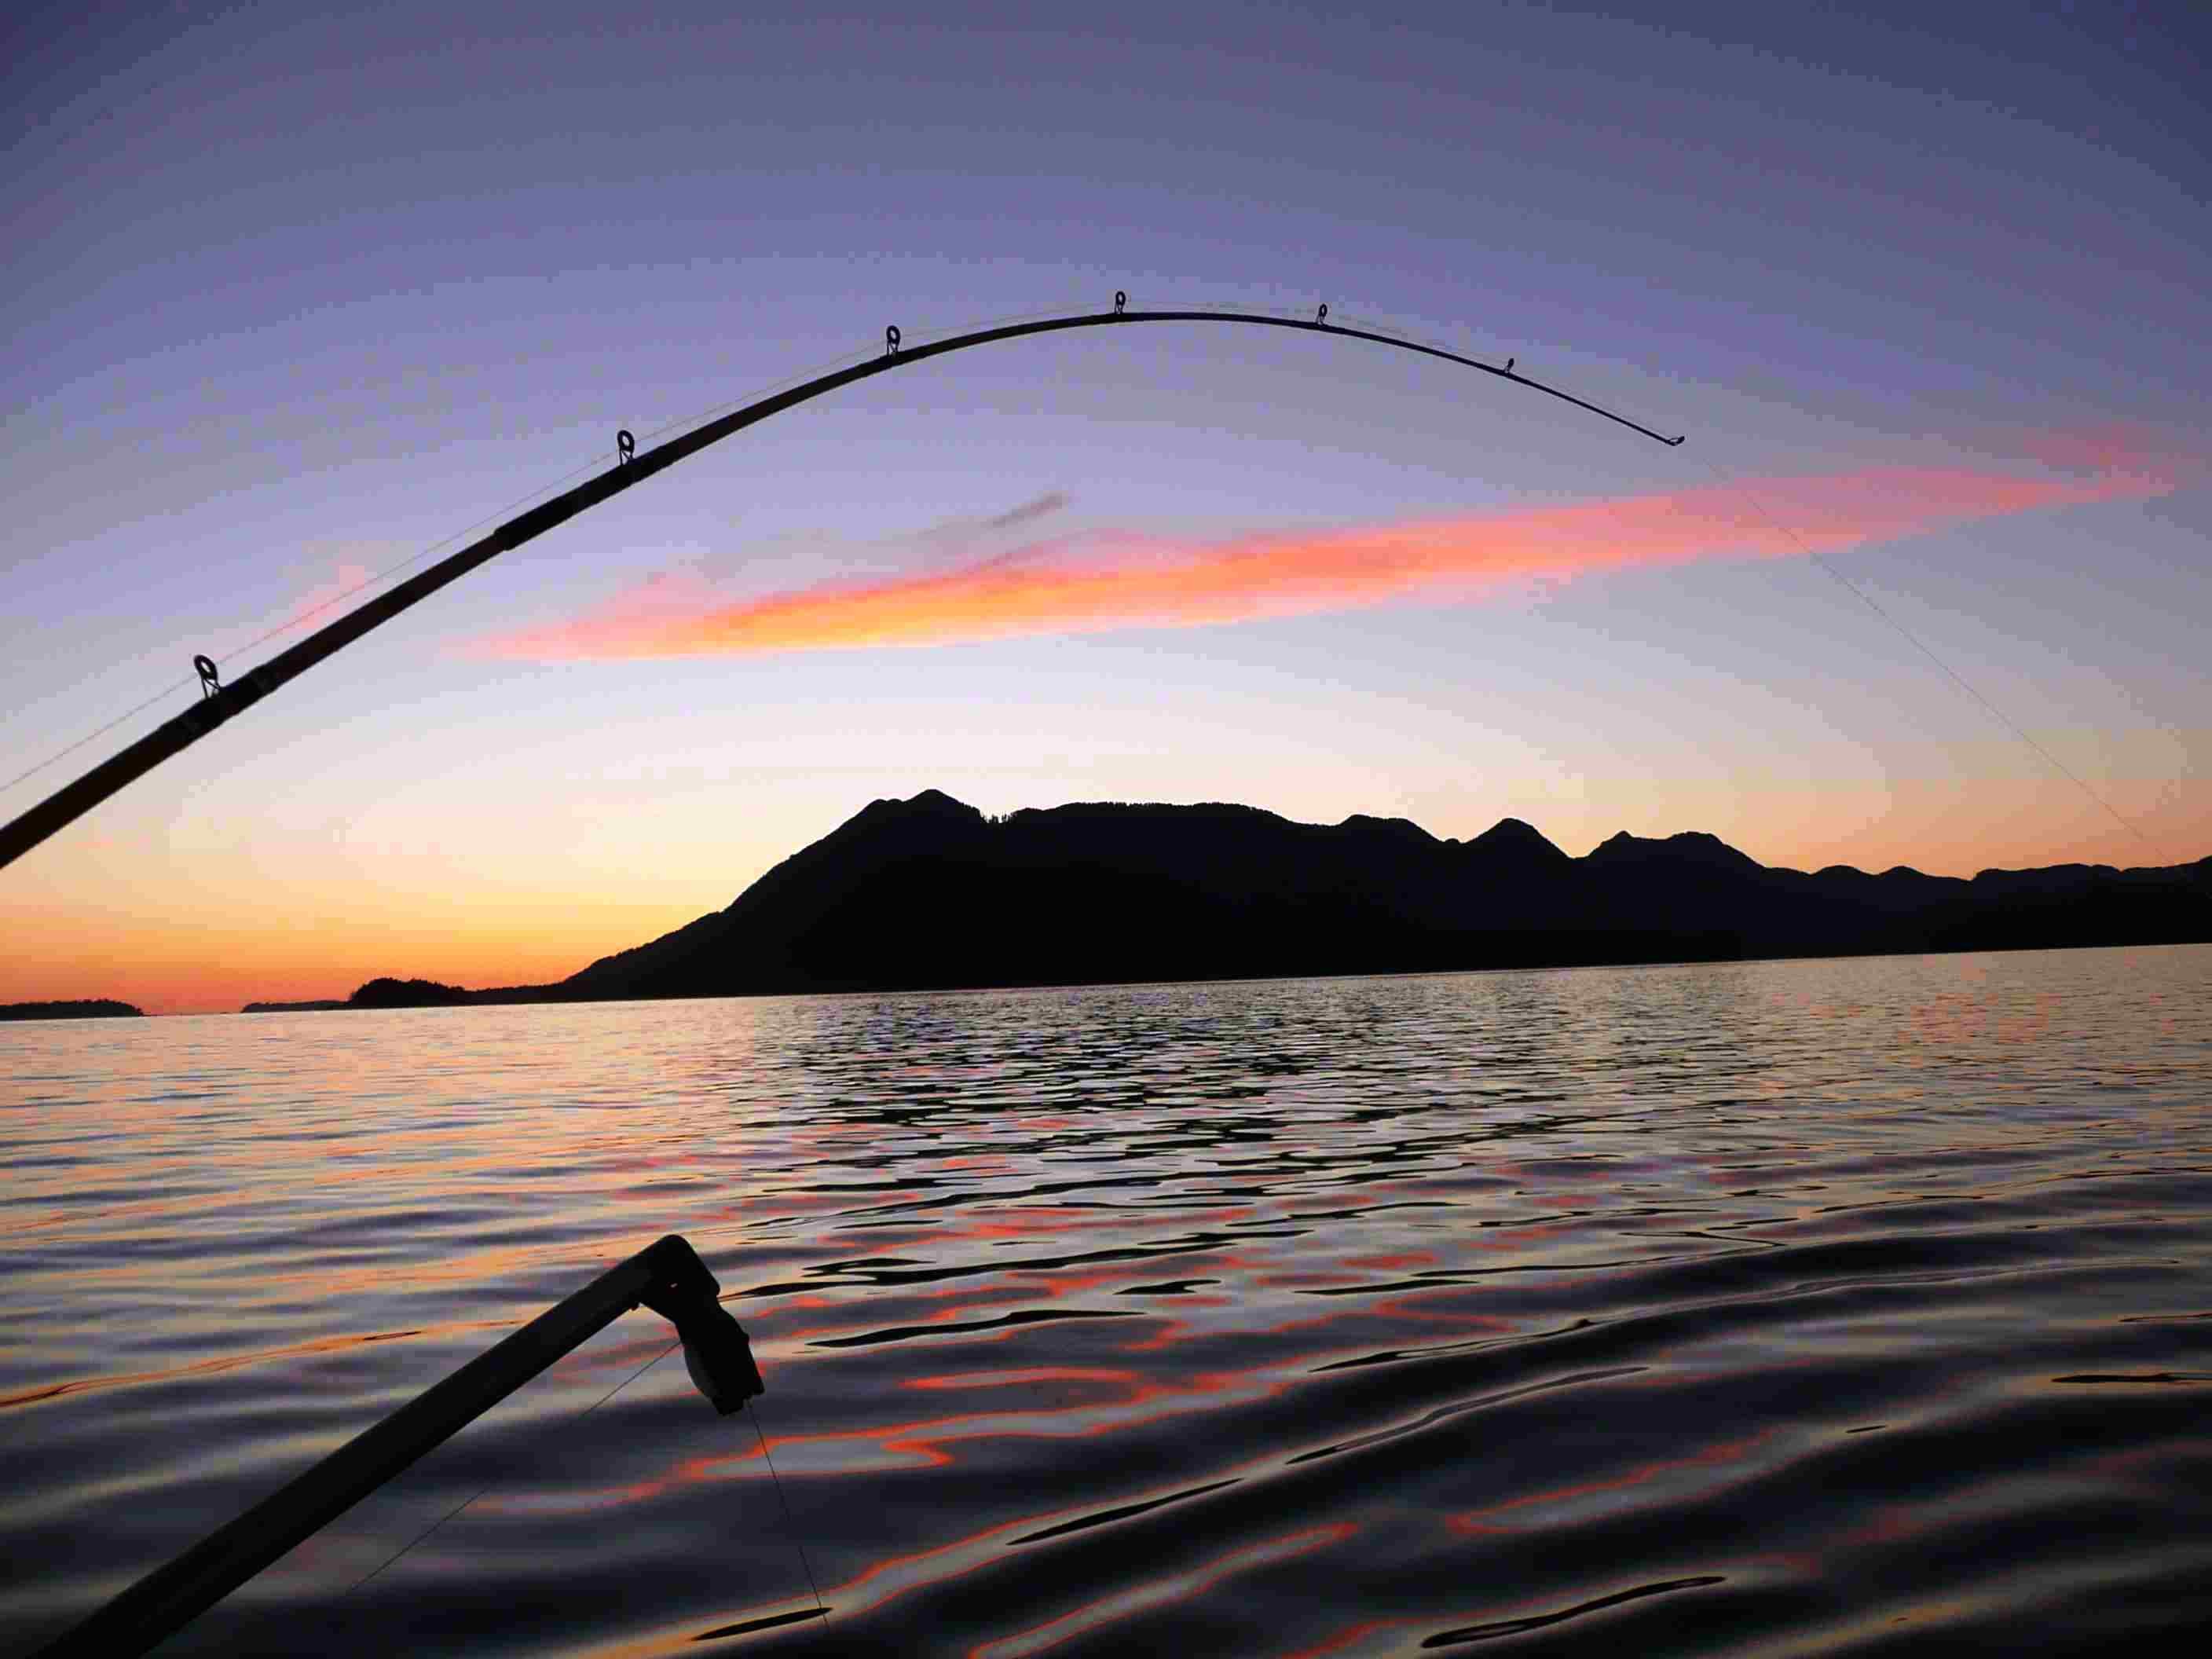 2816x2112 Saltwater Fishing Wallpaper | HD Wallpapers | Pinterest | Wallpaper and  Wallpapers android